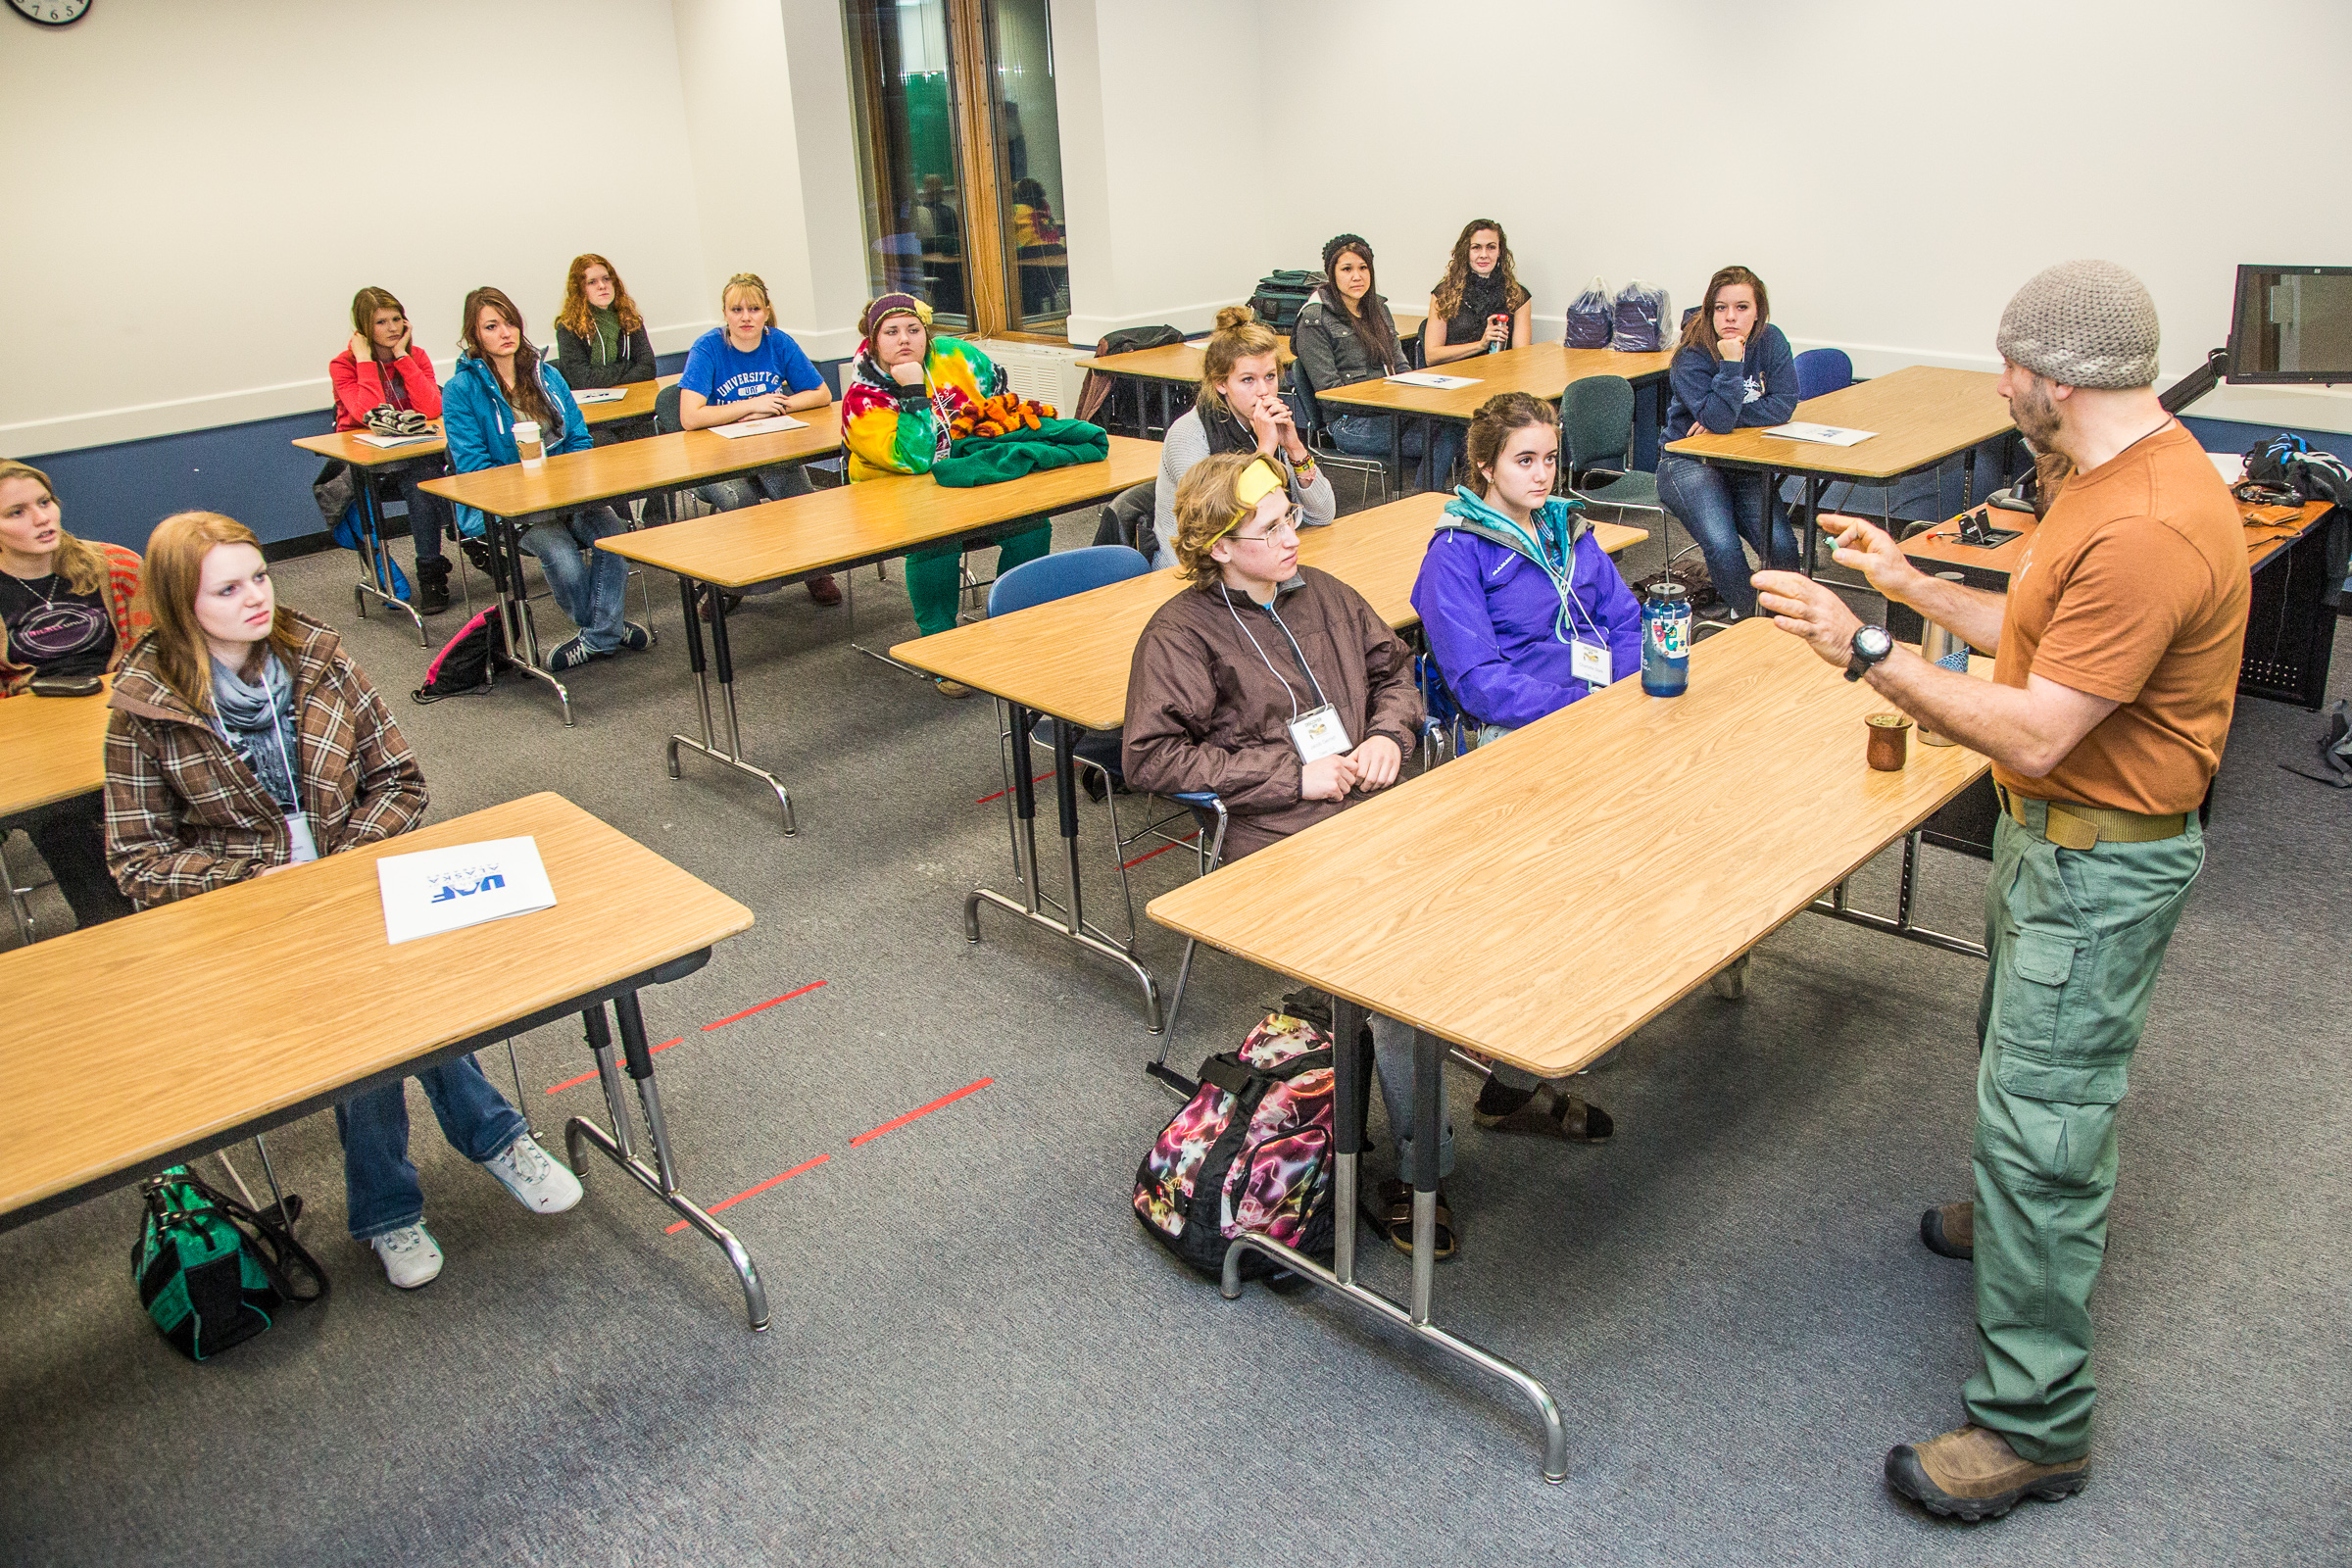 Assistant professor Eduardo Wilner leads a mock philosphy class  with high school seniors during an Inside Out event in a Gruening Building classroom. | UAF Photo by Todd Paris